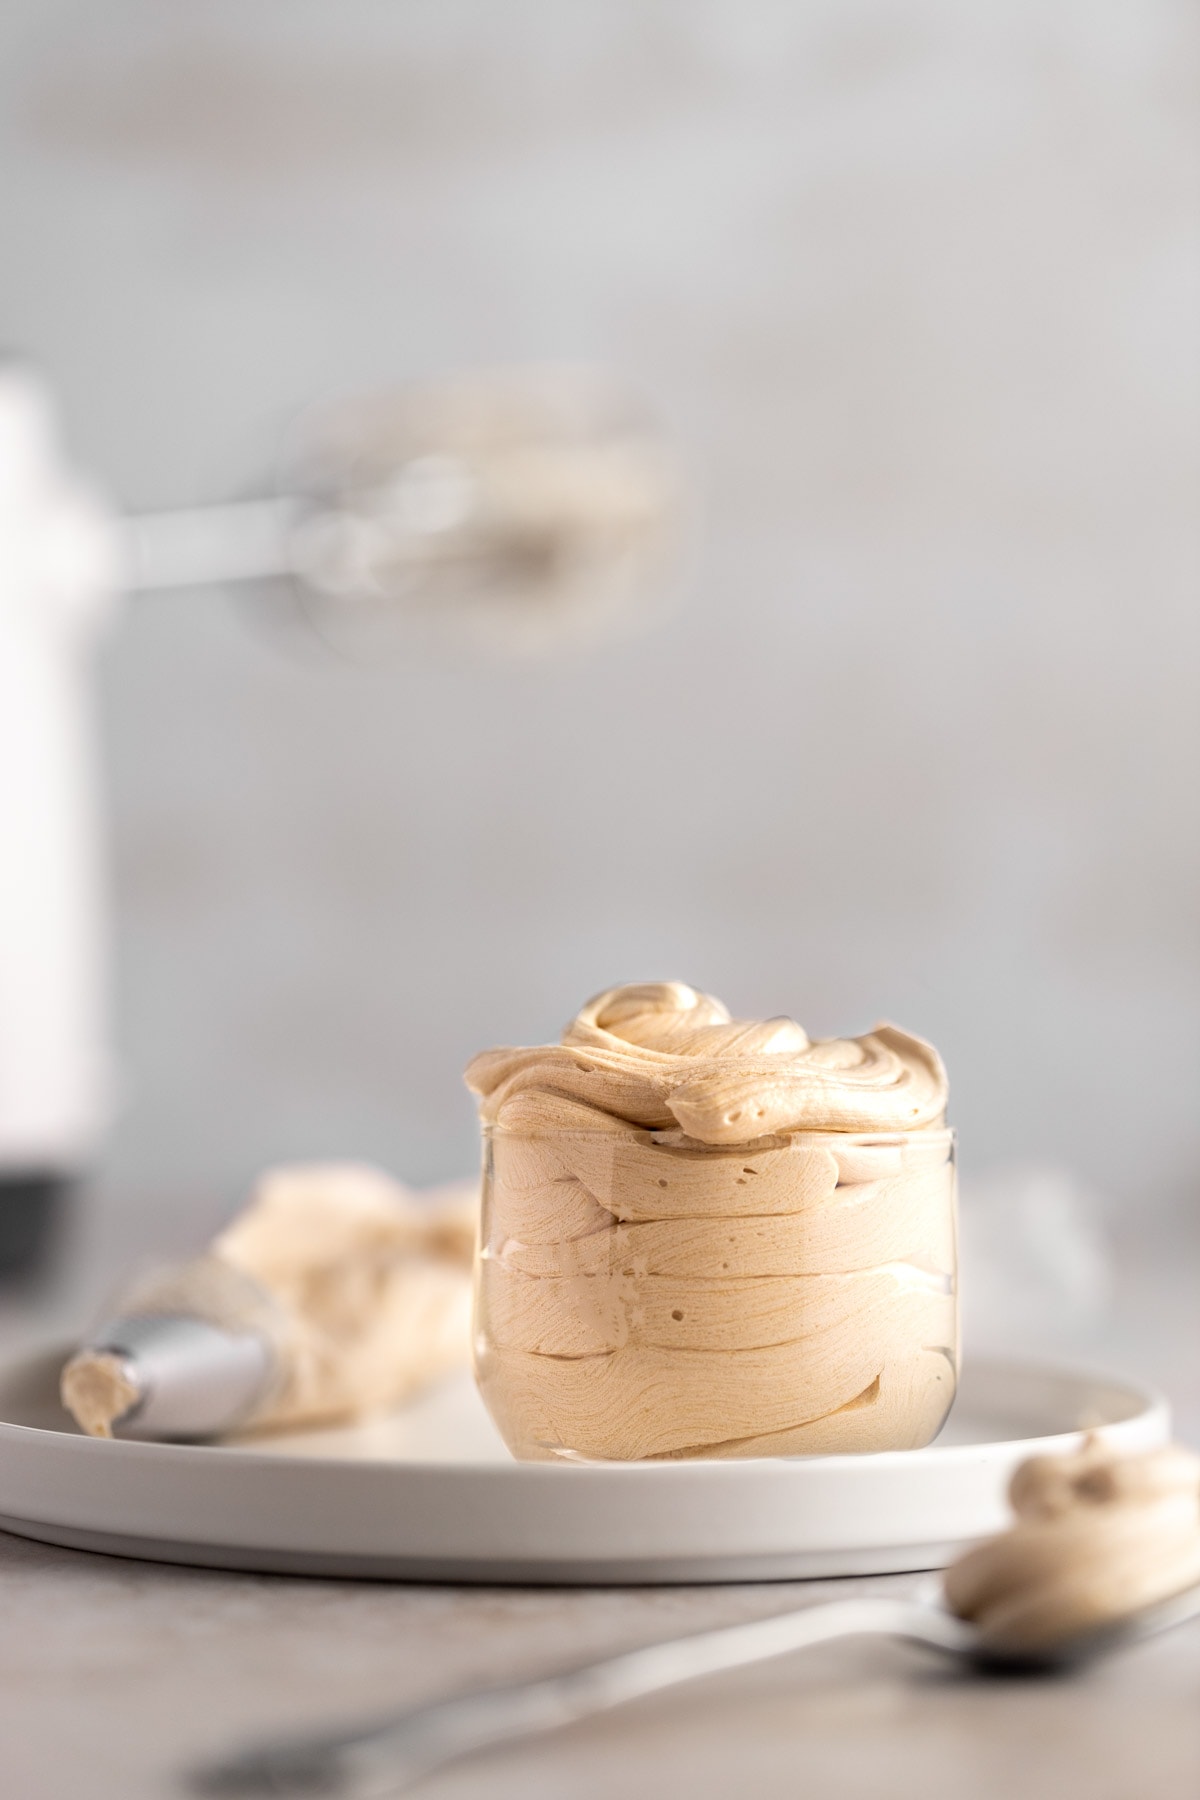 Espresso buttercream frosting in a small glass jar, on a white plate.